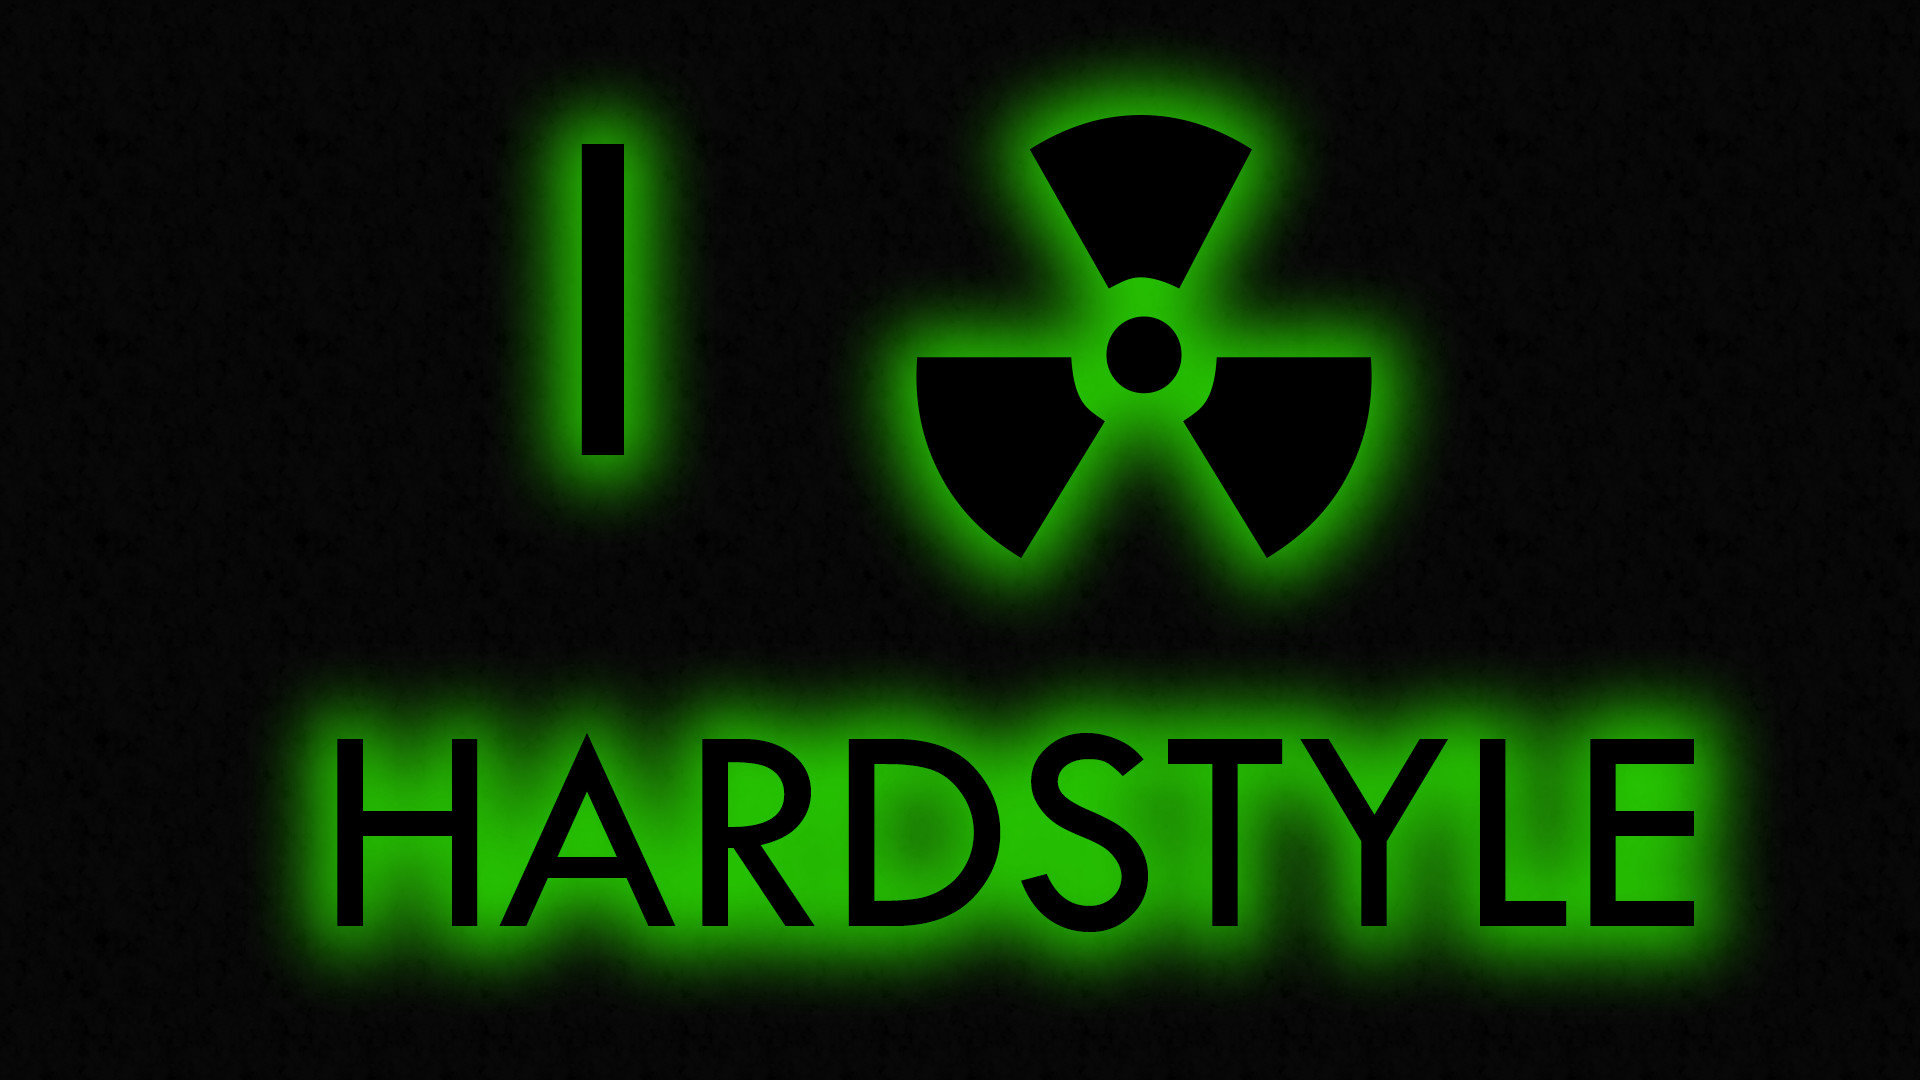 Download full hd 1920x1080 Hardstyle desktop background ID:396798 for free